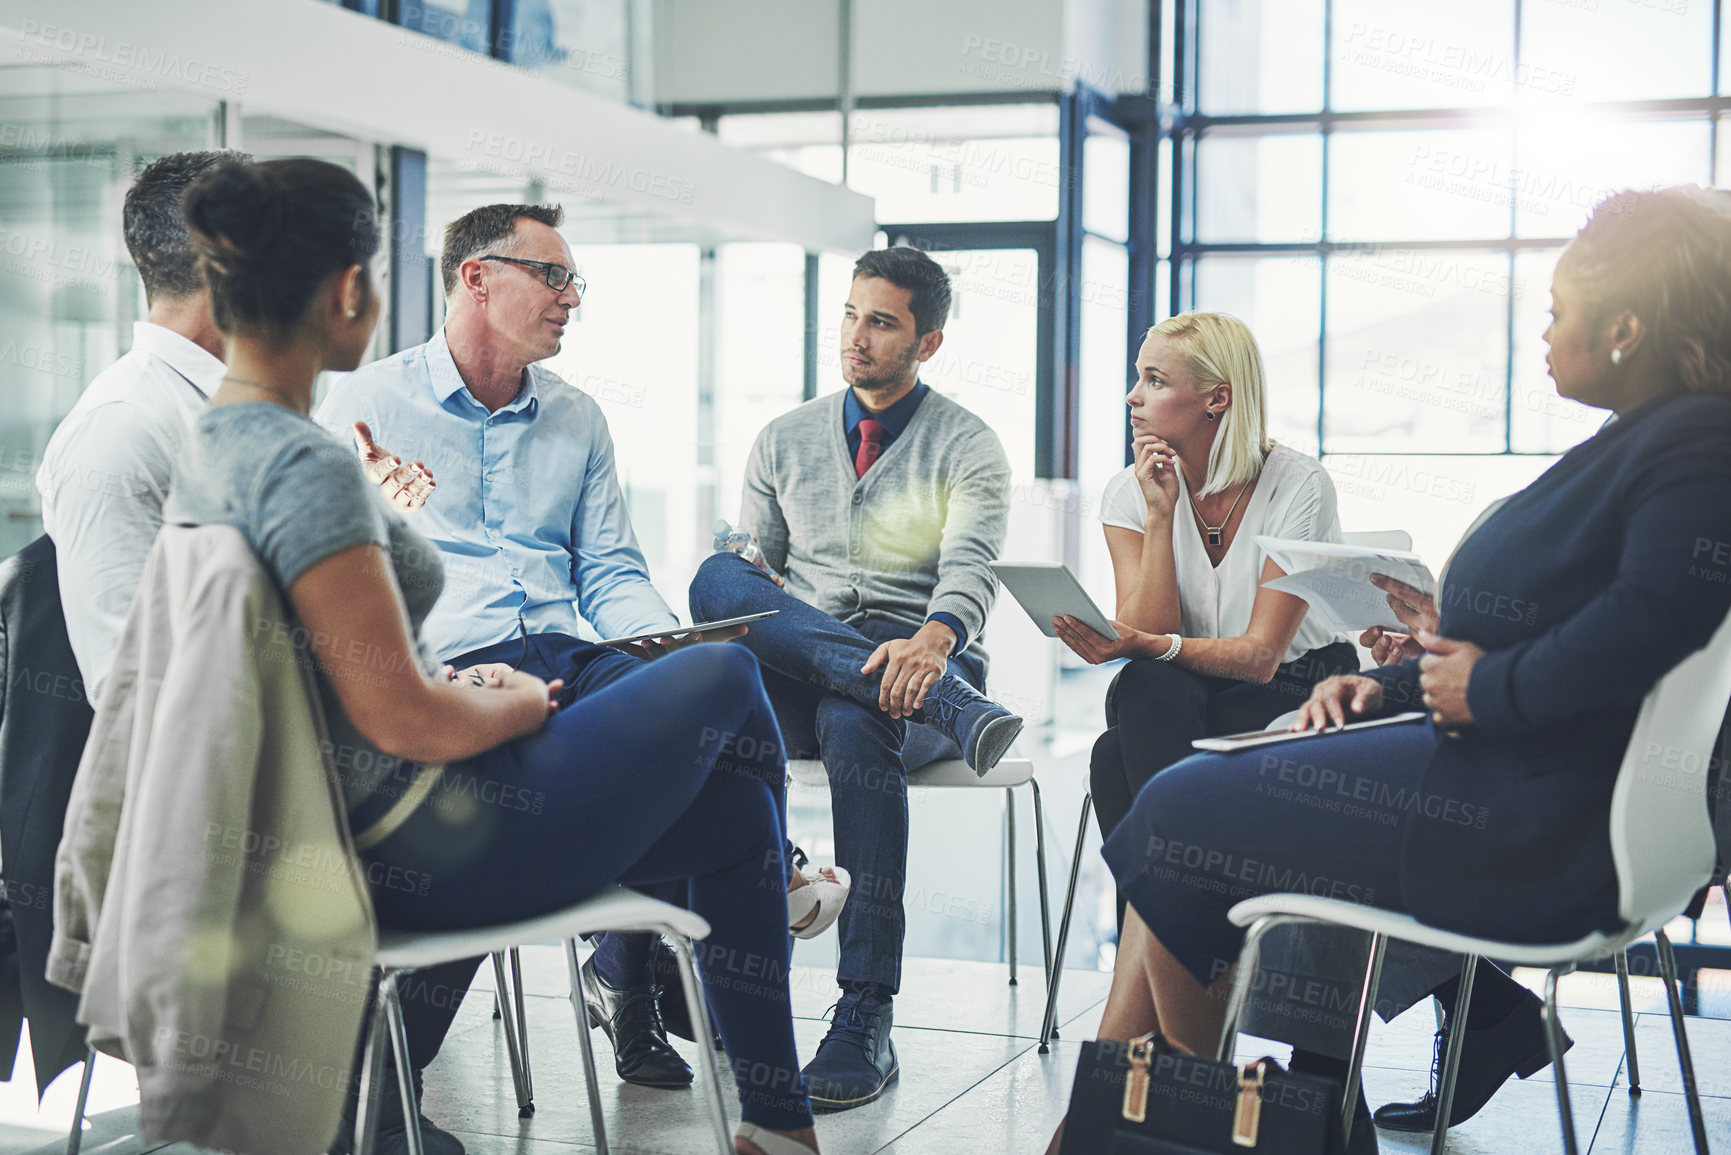 Buy stock photo Modern business people in an informal team building discussion or business talking session. Team leader, manager or supervisor talking to a group of employees or colleagues on new workflow management